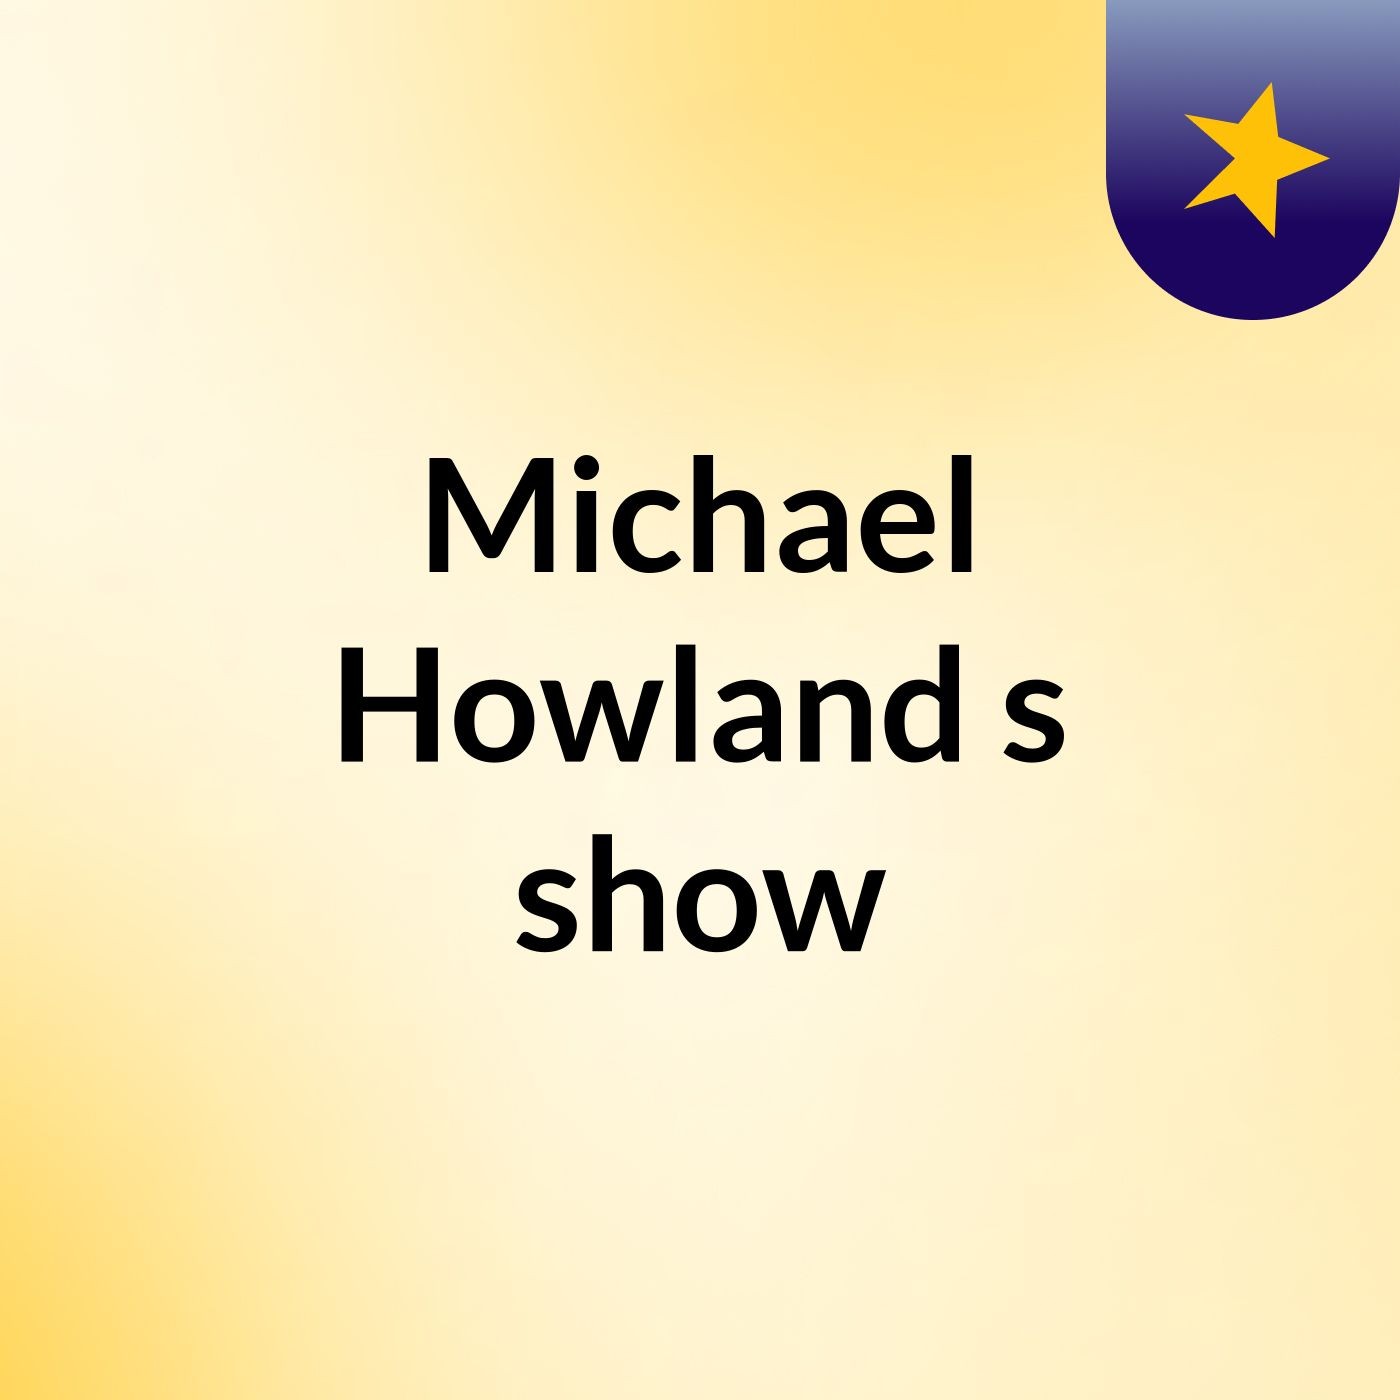 Michael Howland's show